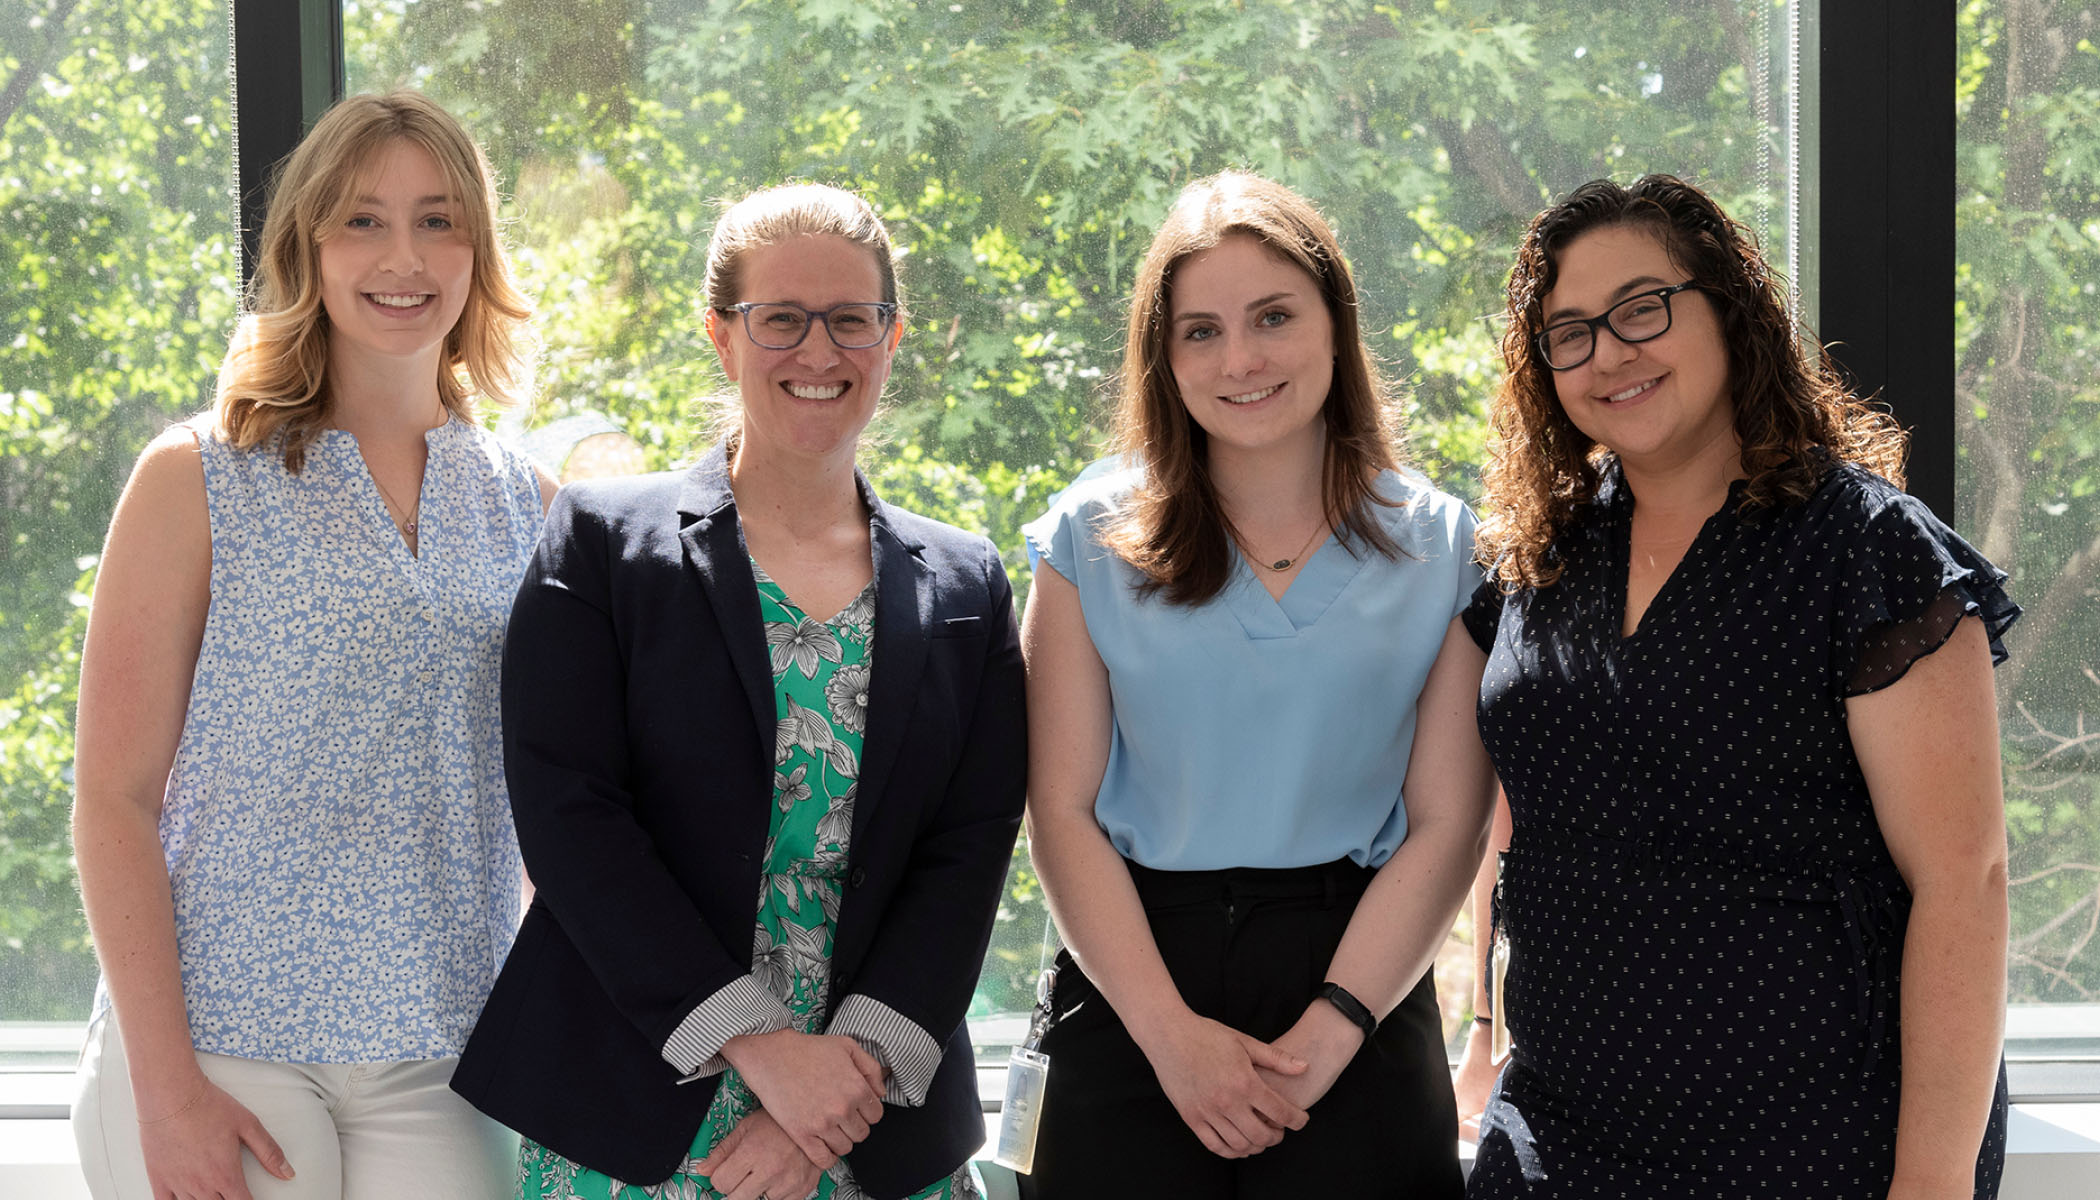 Katie Russell, Samantha Baxter, Carmen Glaze, and Moriel Singer-Berk stand together smiling in front of a window with green foliage in the background, representing the team from the Broad Institute's Center for Mendelian Genomics involved in creating the GeniE tool.